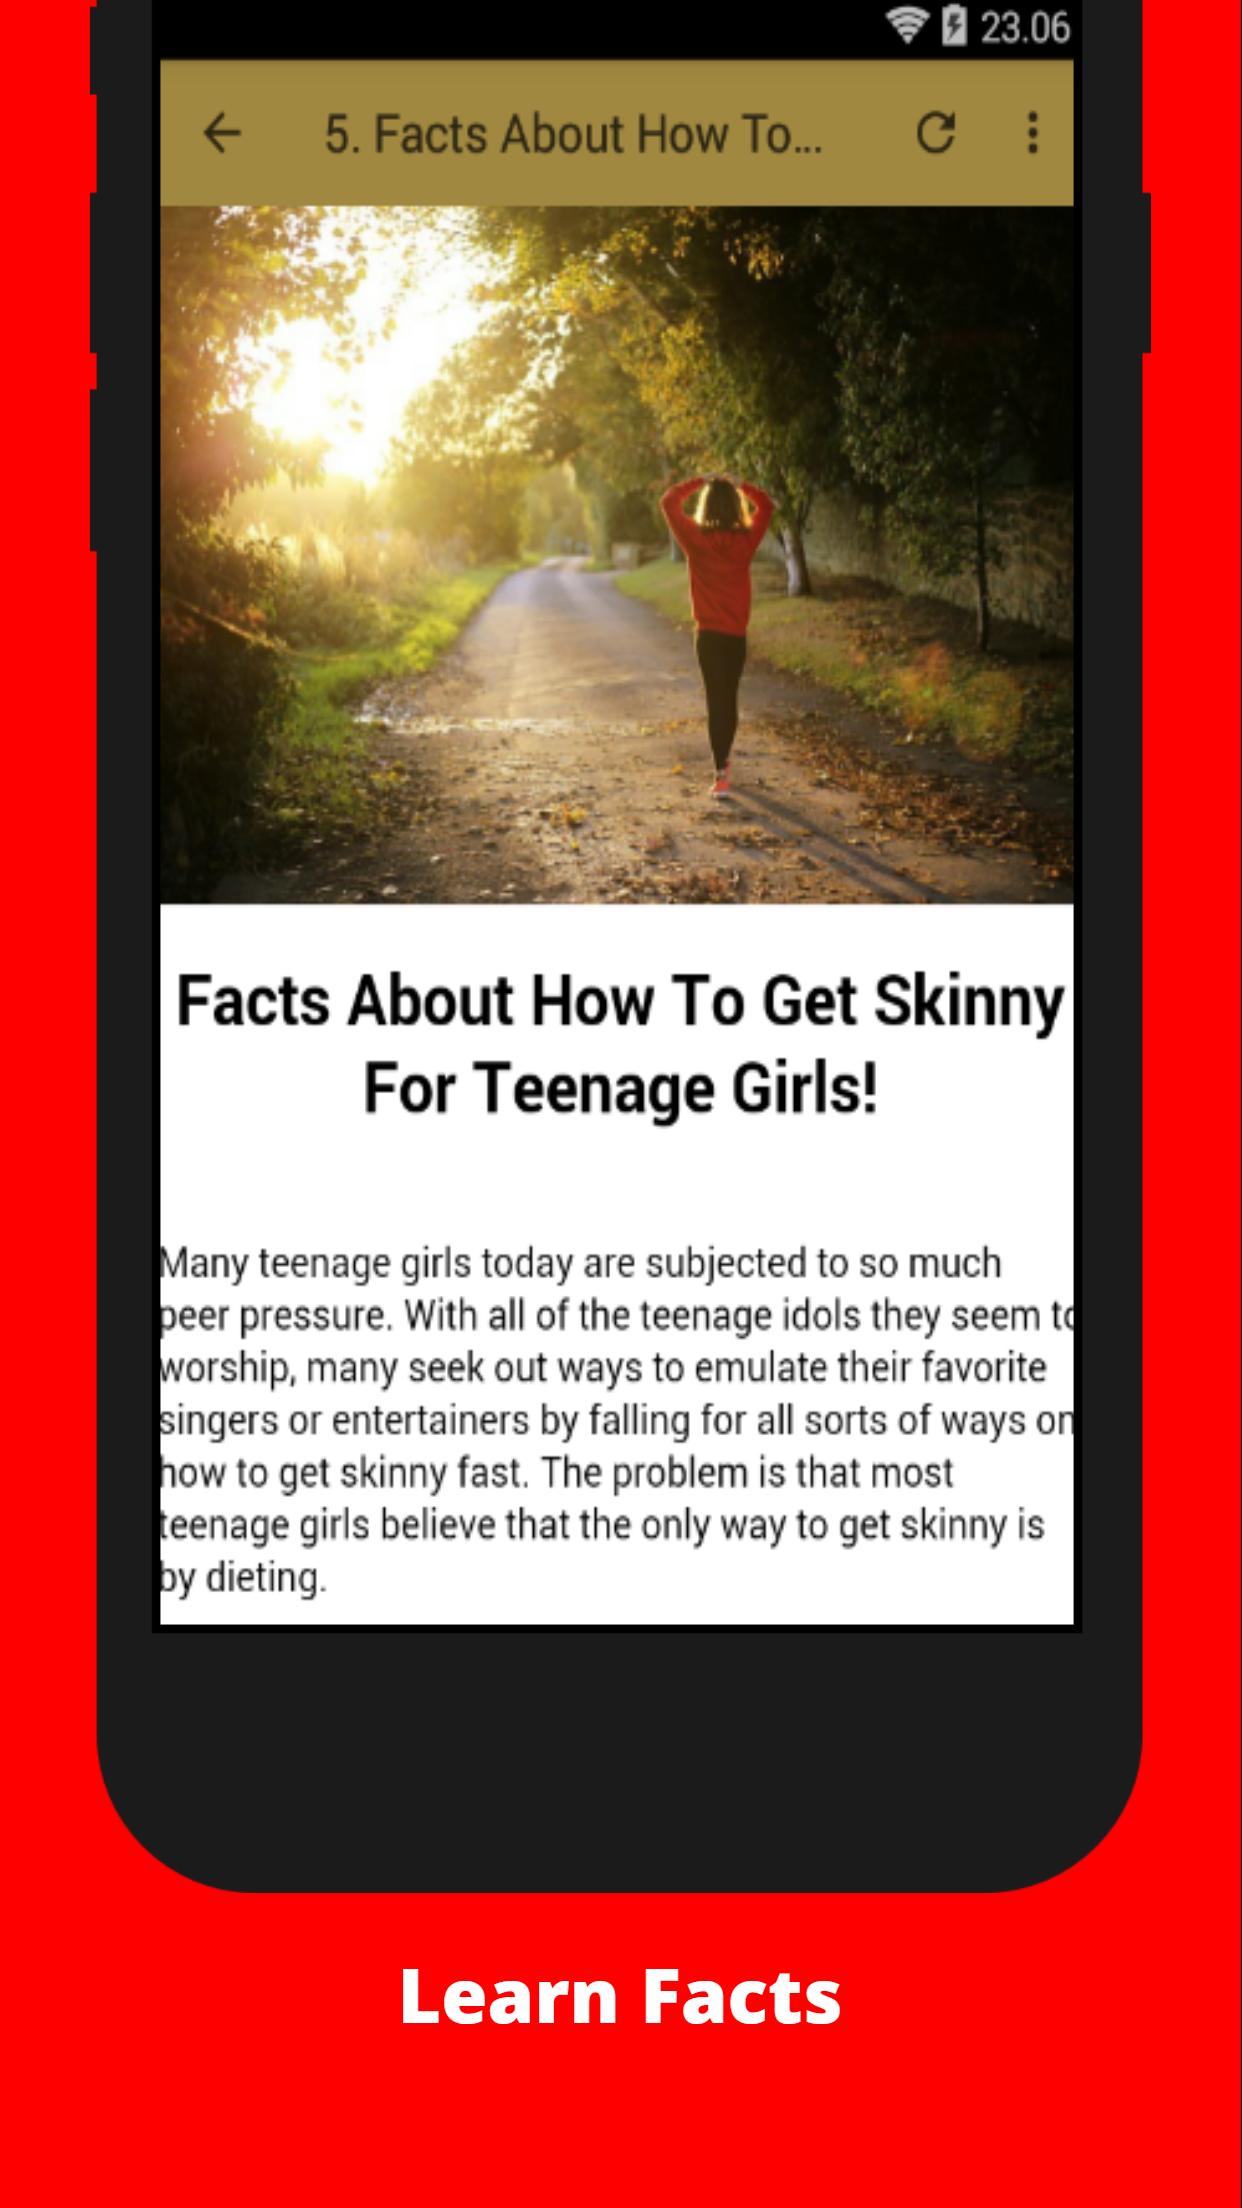 How to Be Skinny for Android - APK Download